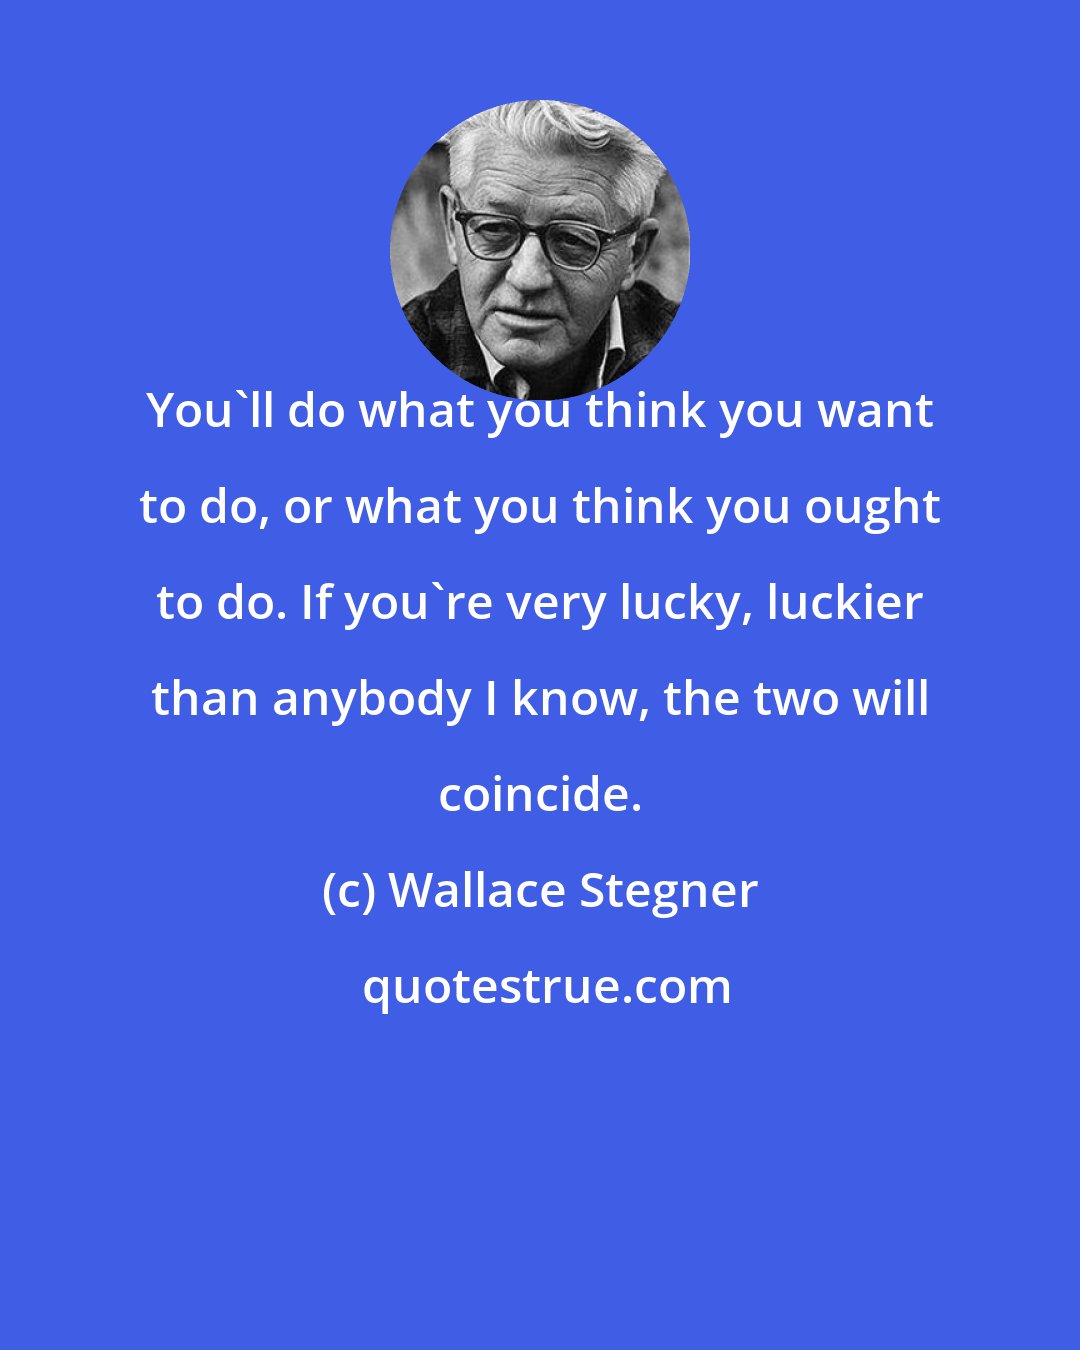 Wallace Stegner: You'll do what you think you want to do, or what you think you ought to do. If you're very lucky, luckier than anybody I know, the two will coincide.